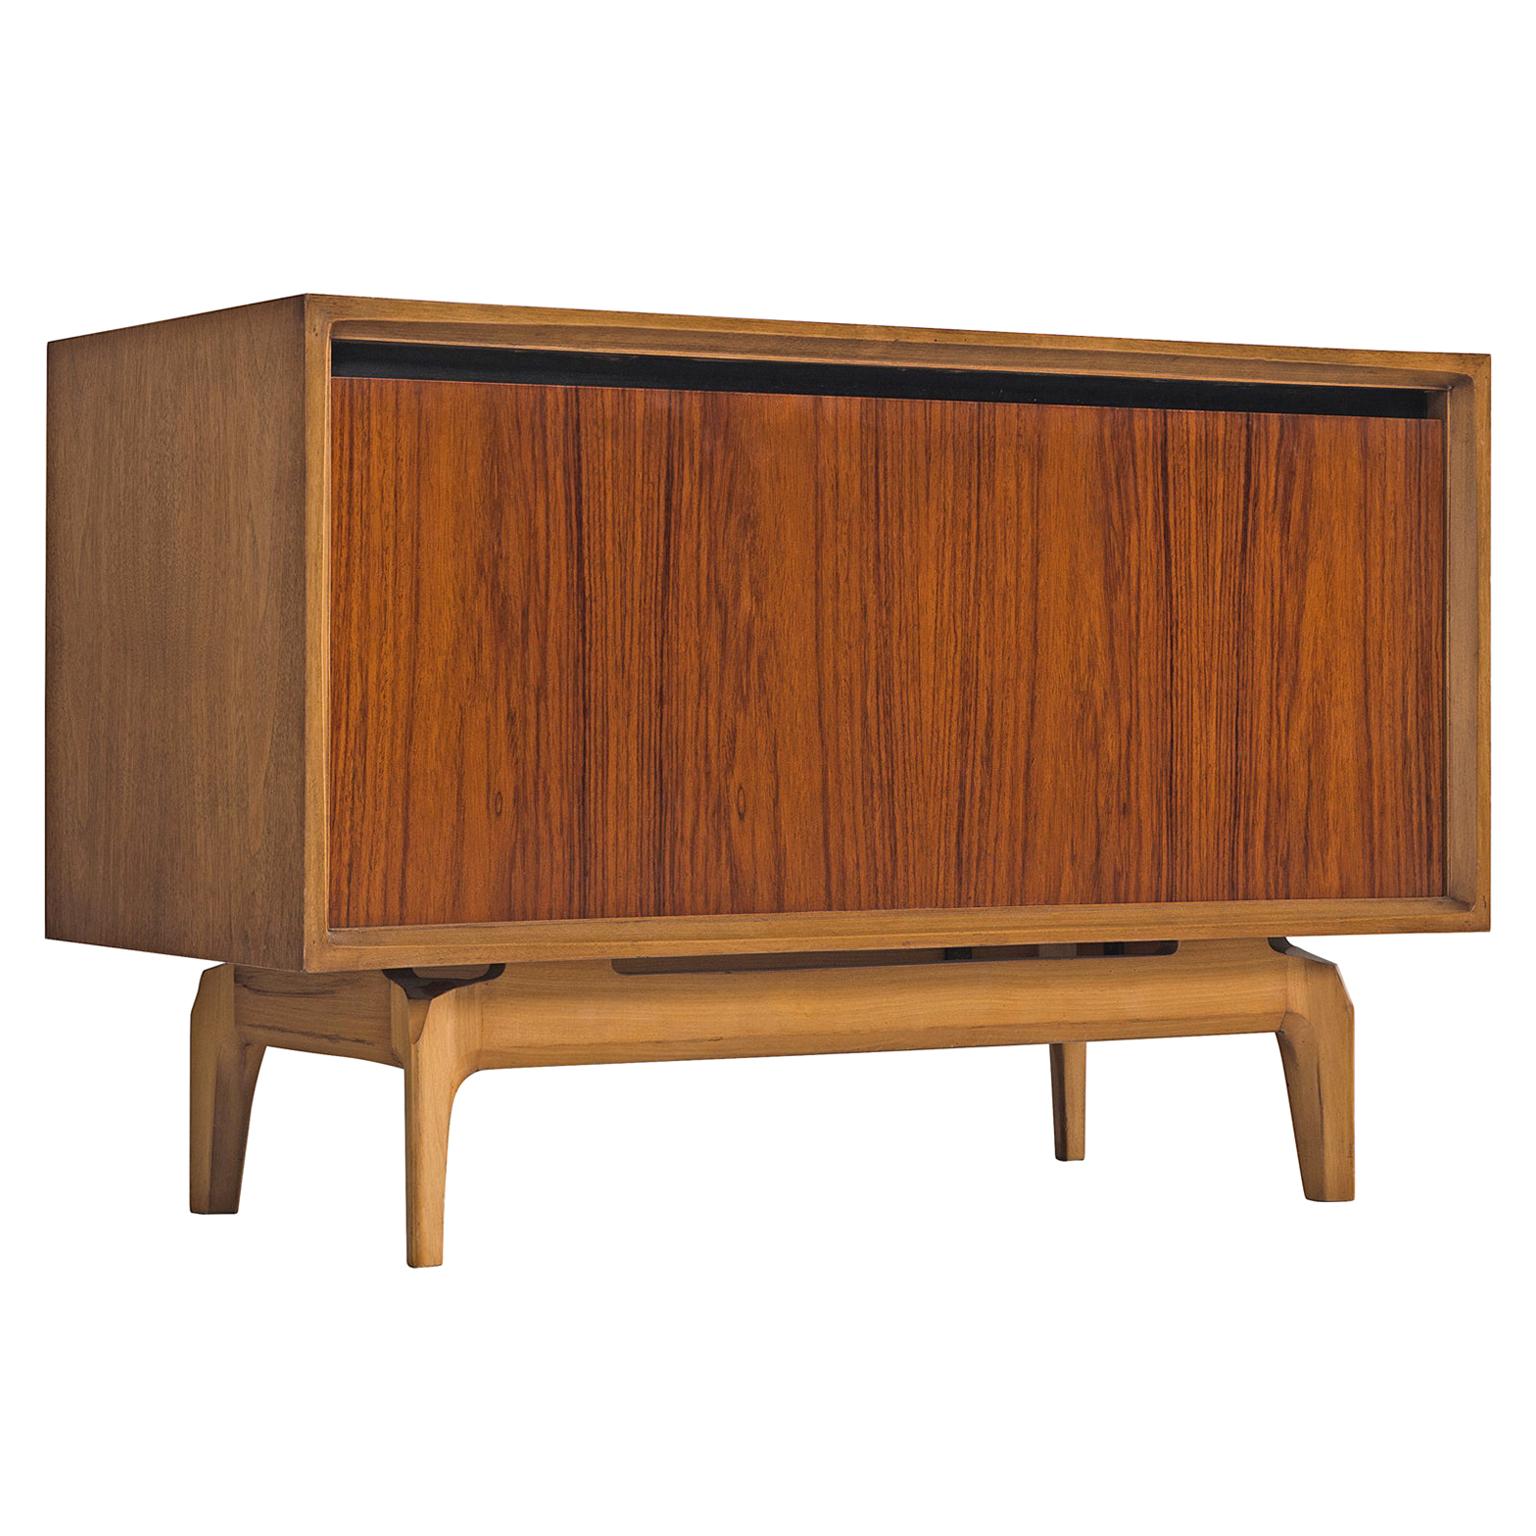 De Coene Small 'Madison' Credenza in Rosewood and Walnut